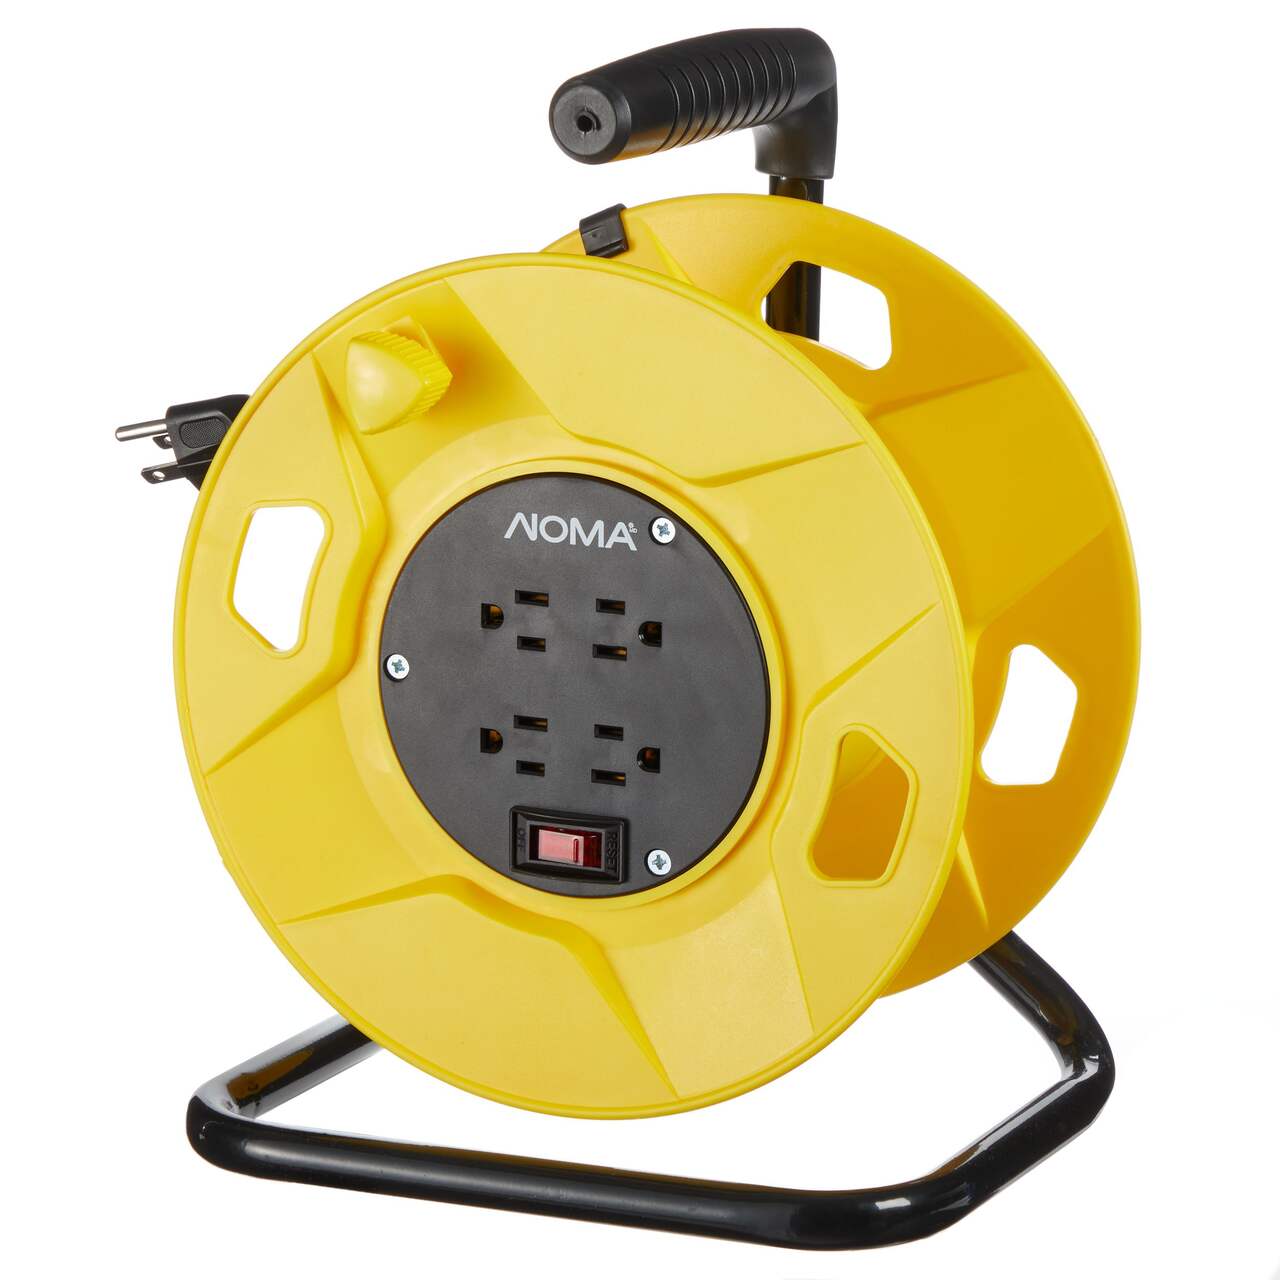 Quad Receptacle Cord Reel - 100 ft - 12 AWG